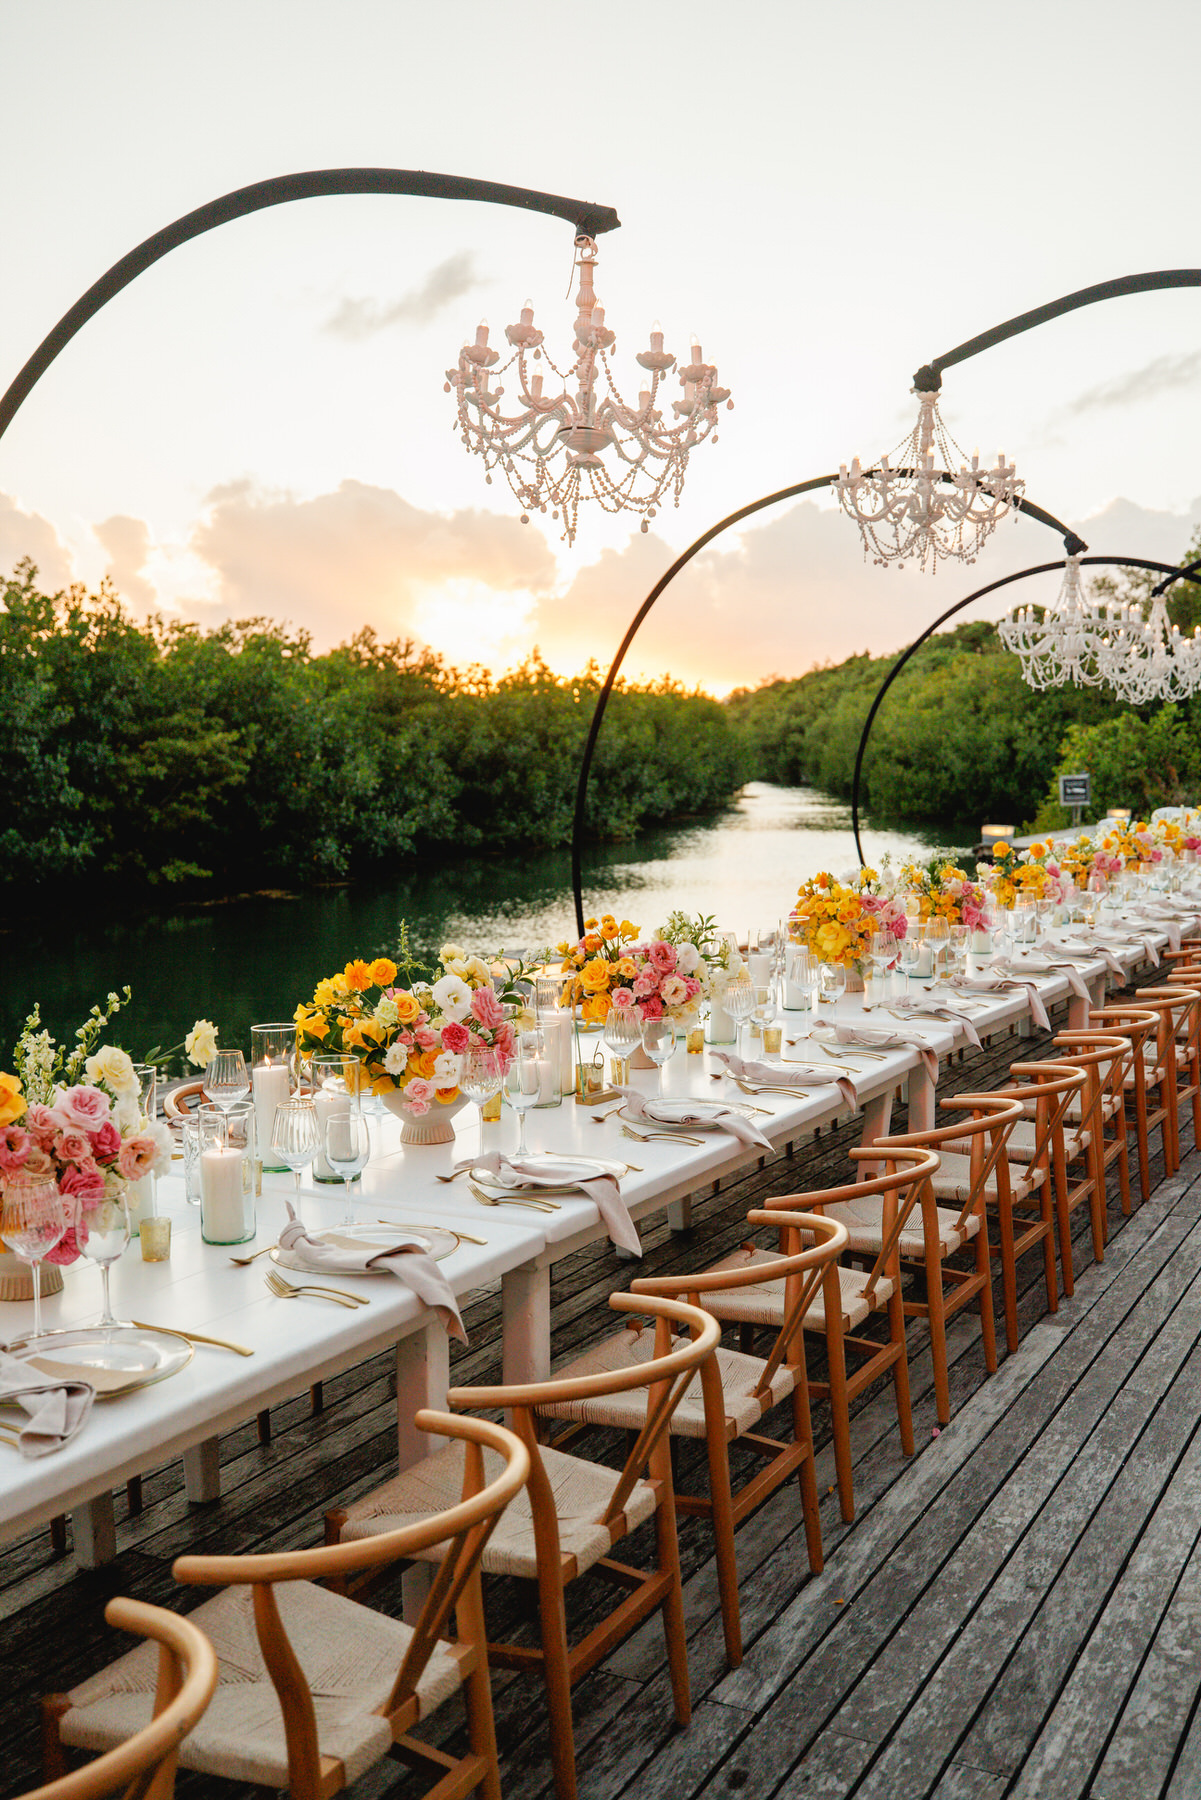 reception setup at Terra Nostra. Photos by Take it Photo. Planning and design: Canteiro weddings. Wedding reception in Nizuc, Mexico. The decor is festive and tropical